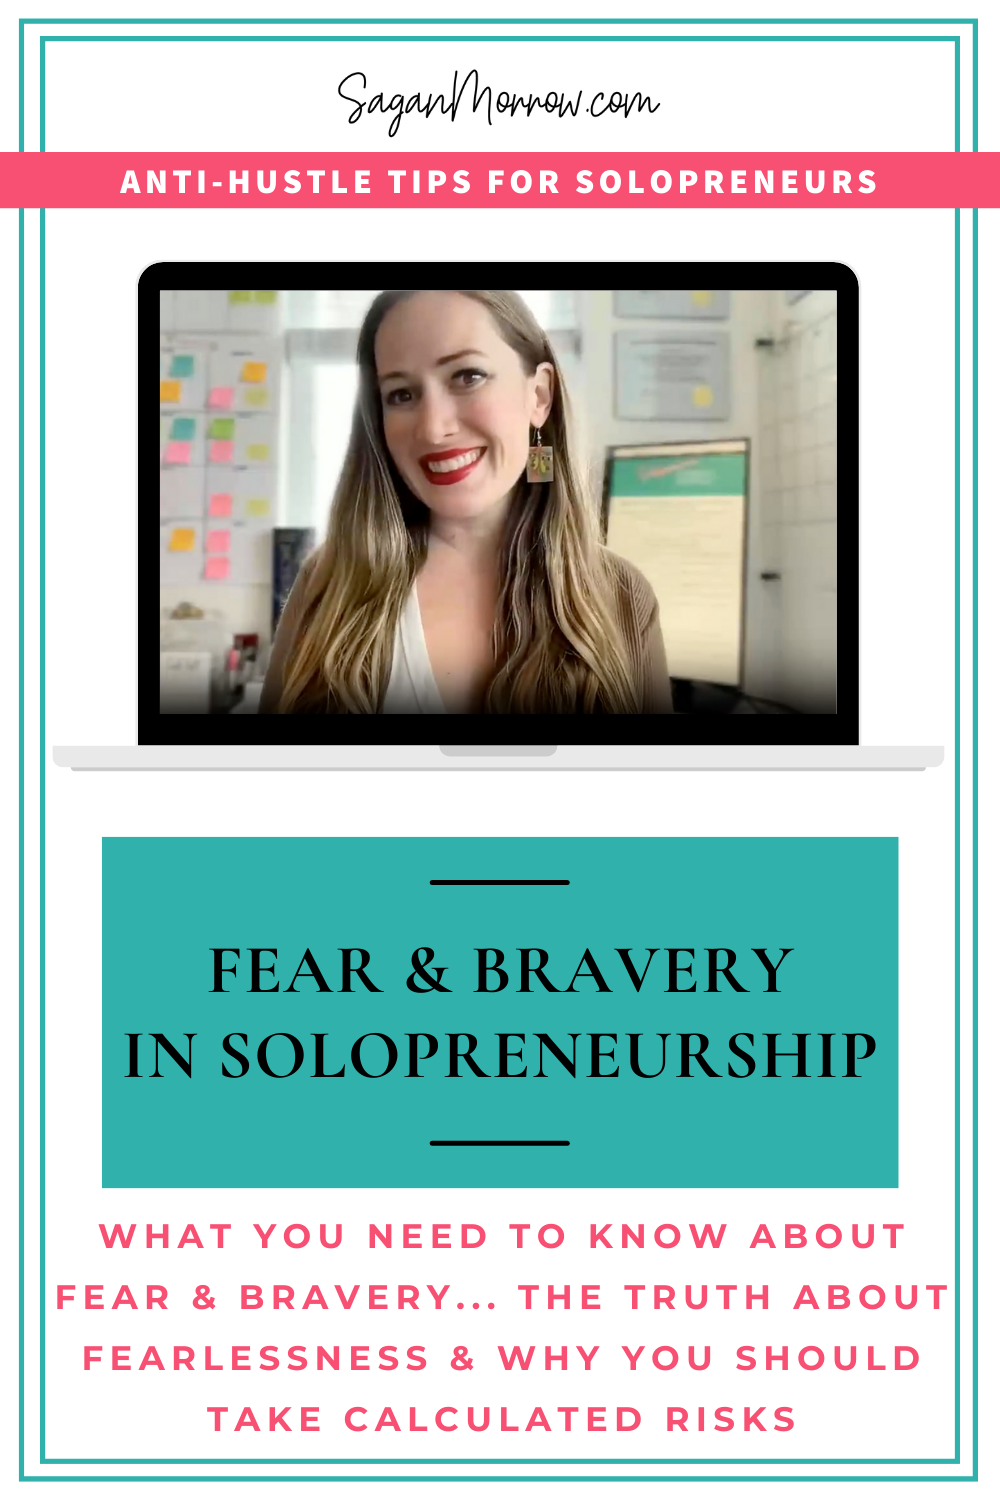 Is fear holding you back in business (or in life)? Do you hear yourself saying, “I’d do this thing, if only I was brave enough”? Let’s unpack that in this video! You'll learn about fear vs bravery in solopreneurship, what you need to know about both fear and bravery, the truth about fearlessness, and why you should take calculated risks. This is a great video to watch if you're thinking about hiring a solopreneur coach and you're nervous about making the big leap — let's address those fears and get to the truth you need to know about solopreneur bravery.